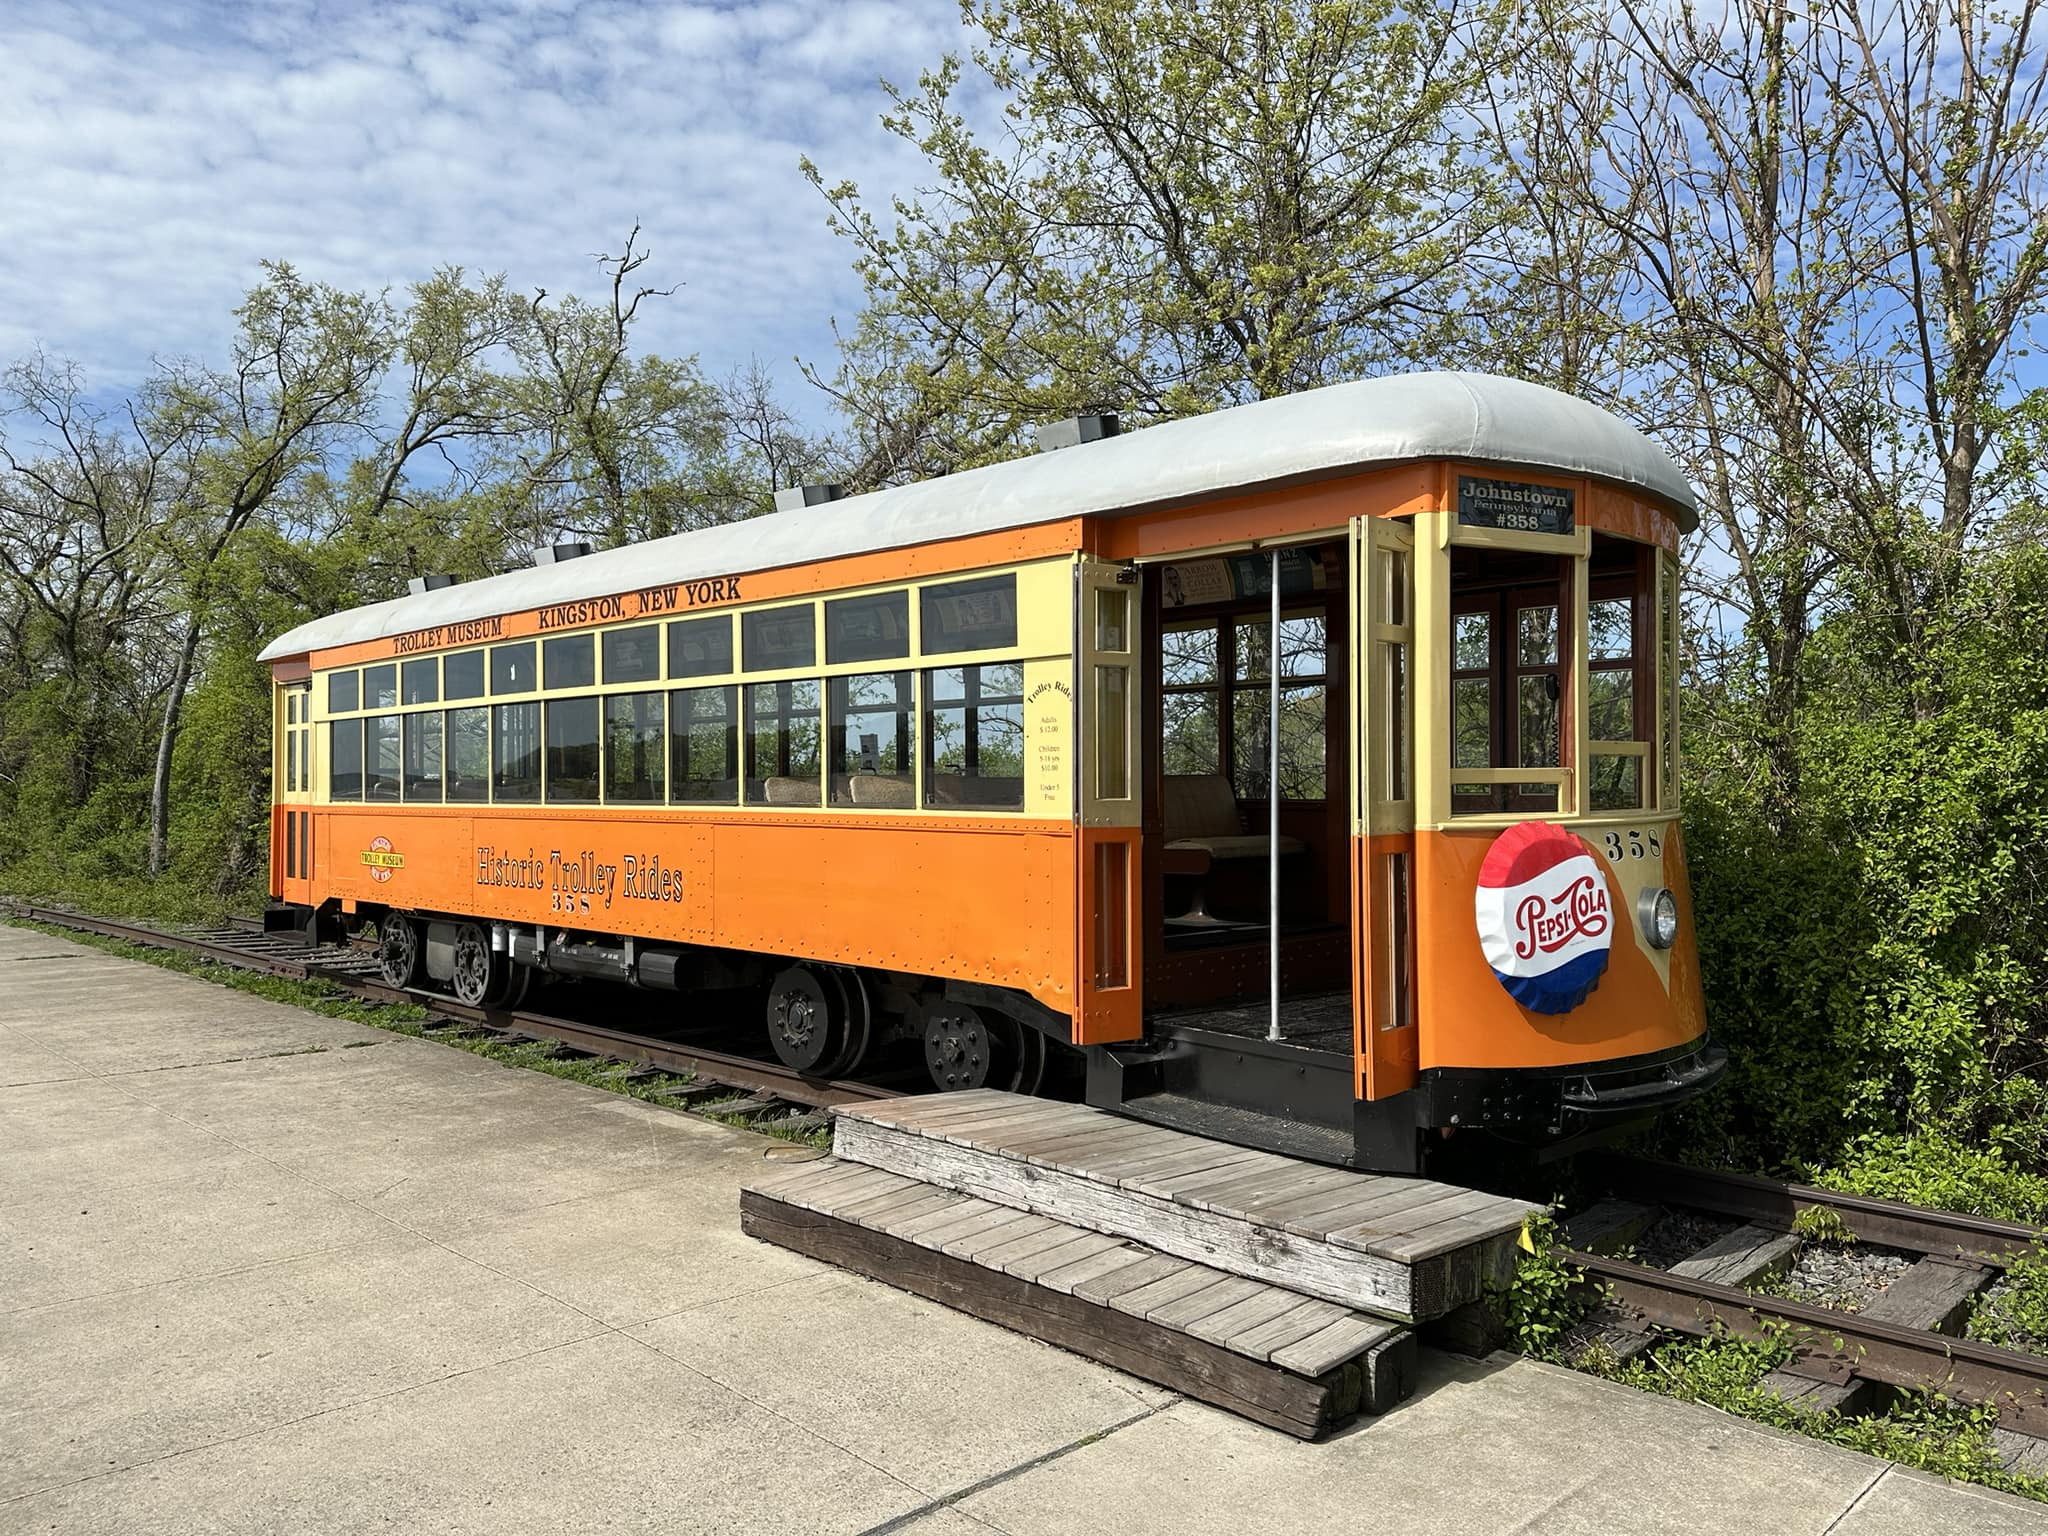 Trolley Museum of New York